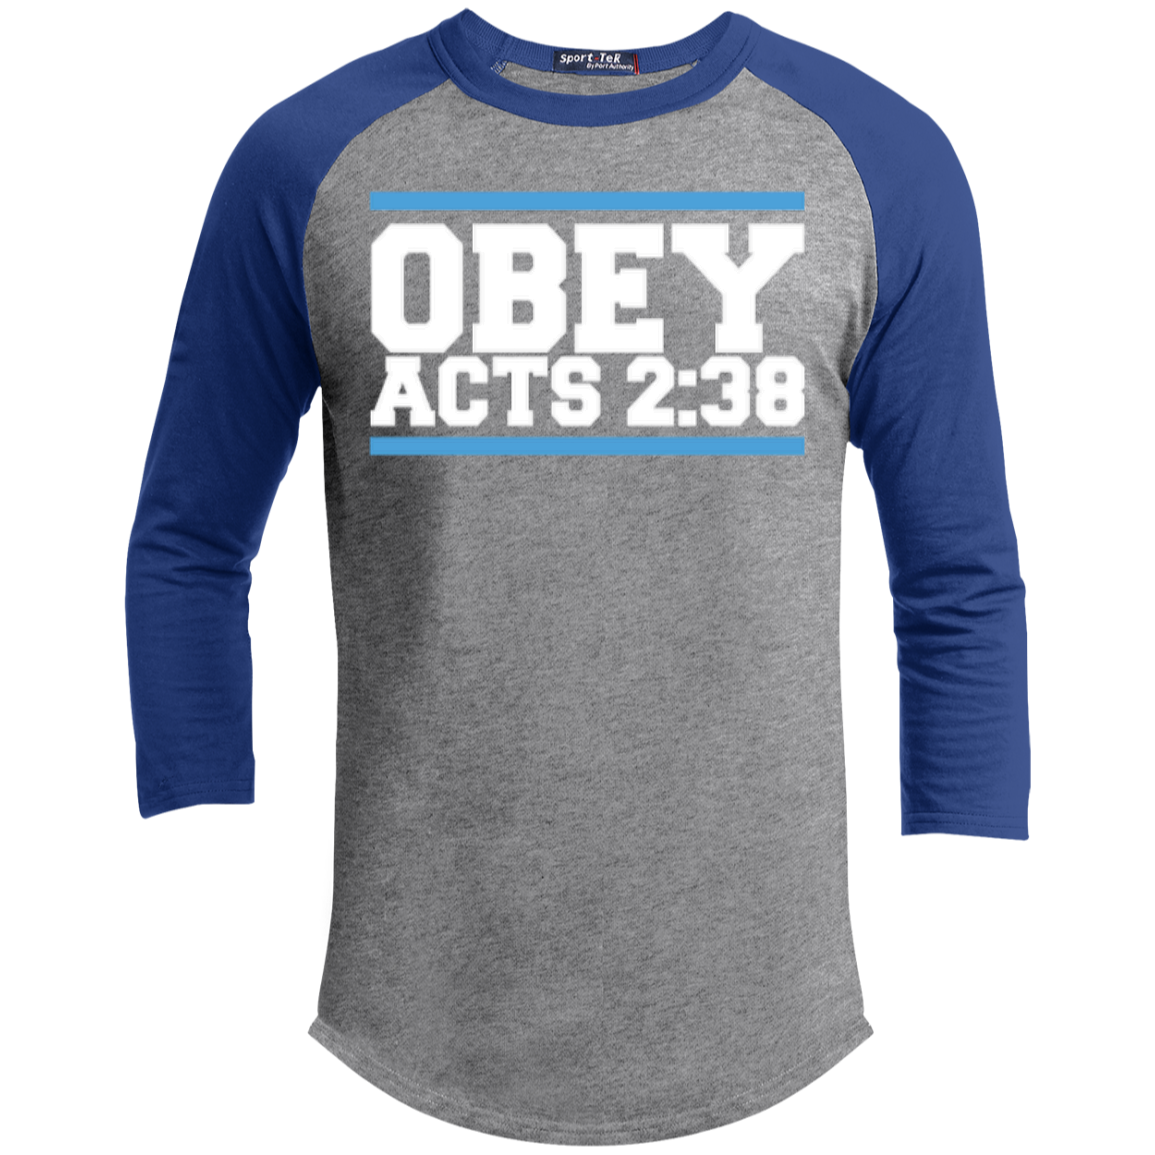 Obey Acts 2:38 - Sporty 3/4 Length Tee Shirt - Kick Merch - 2